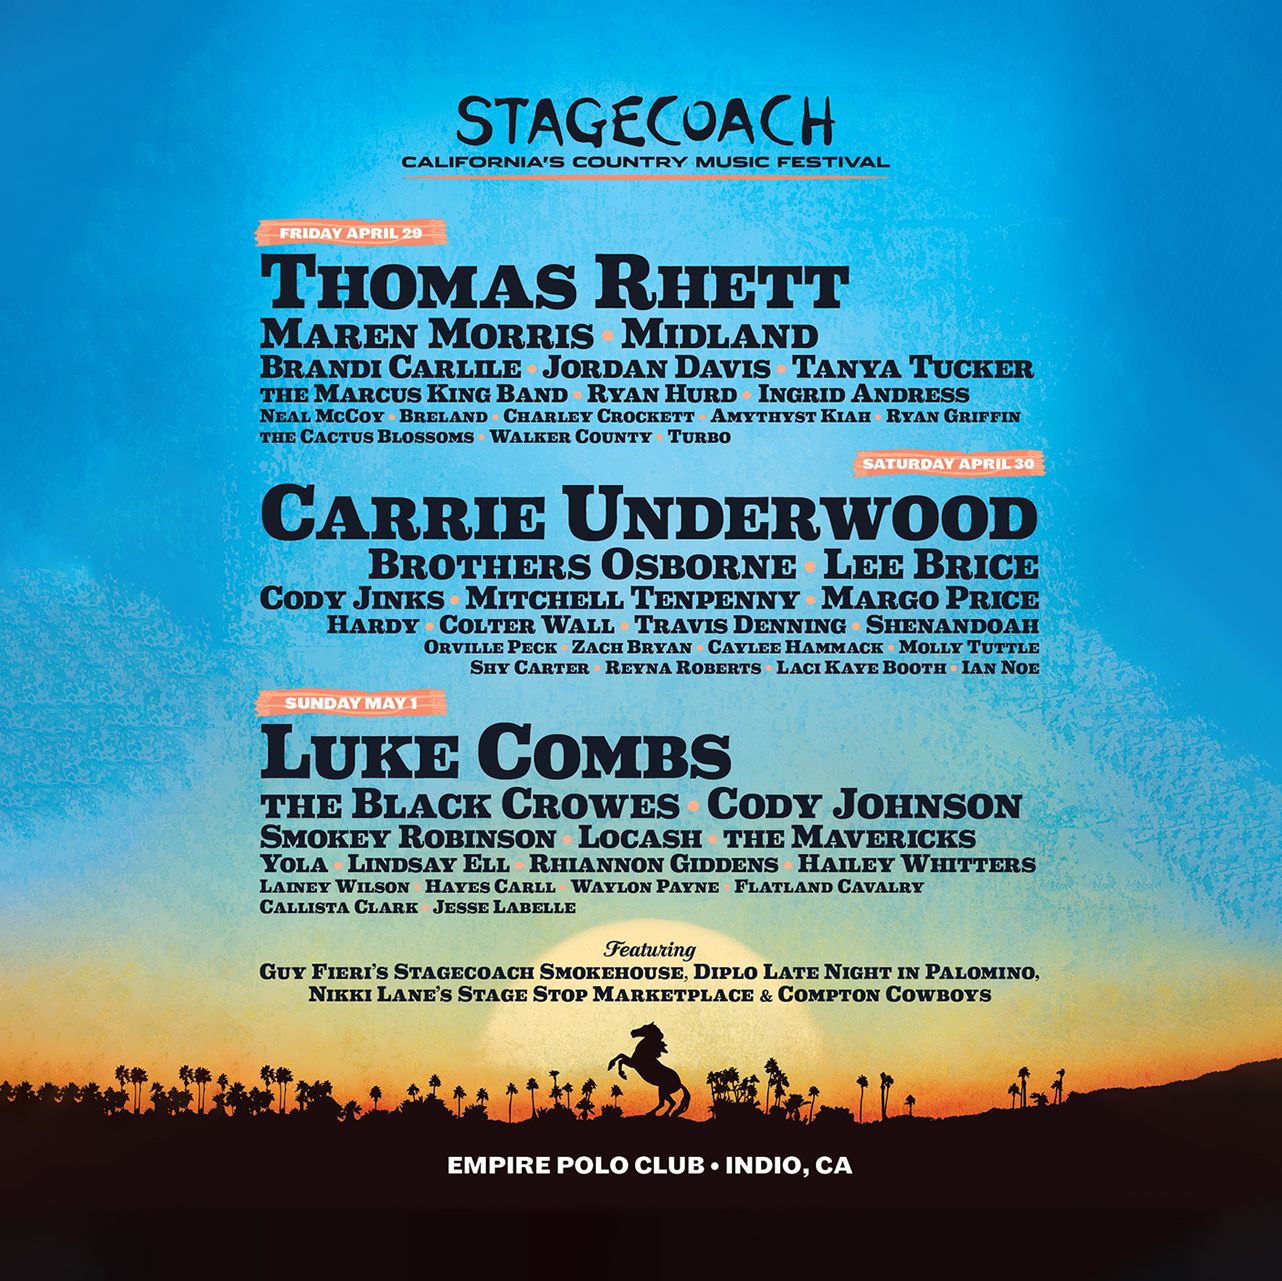 See Why Stagecoach Headliner Carrie Underwood Is a Fashion Idol